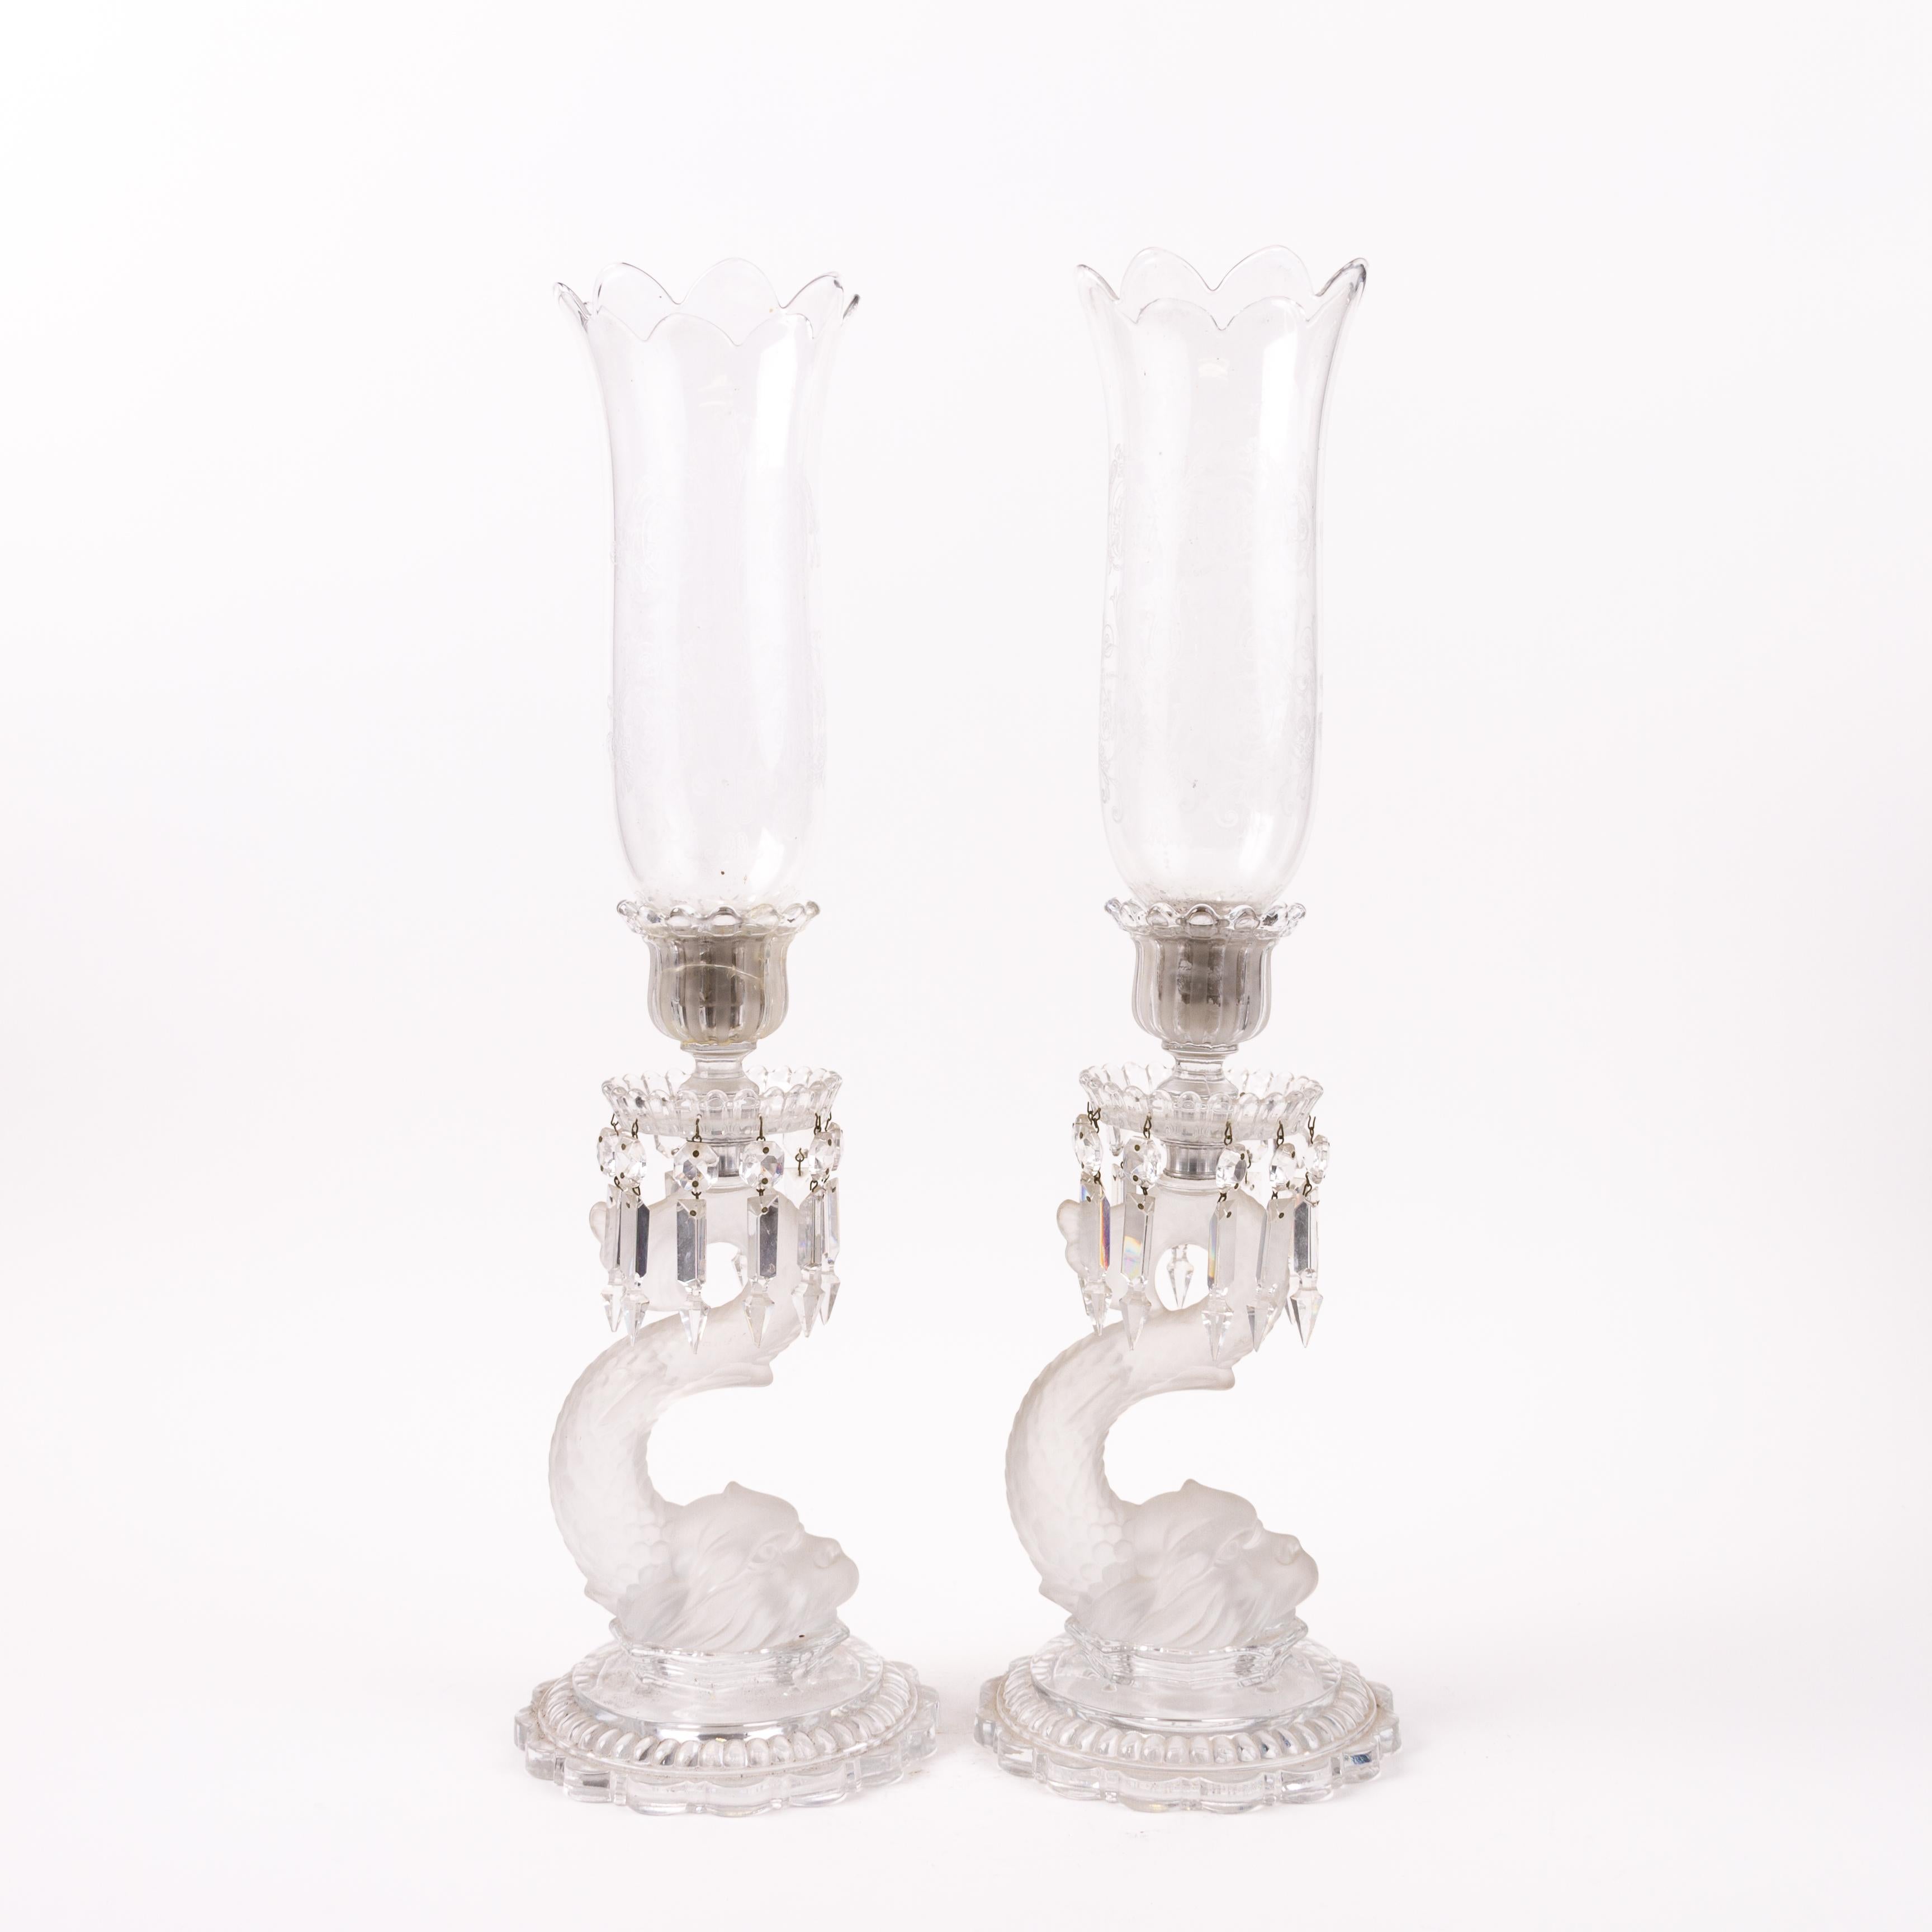 Pair of Baccarat Crystal Dolphin Candle Holders Early 20th century
Good condition
Free international shipping.